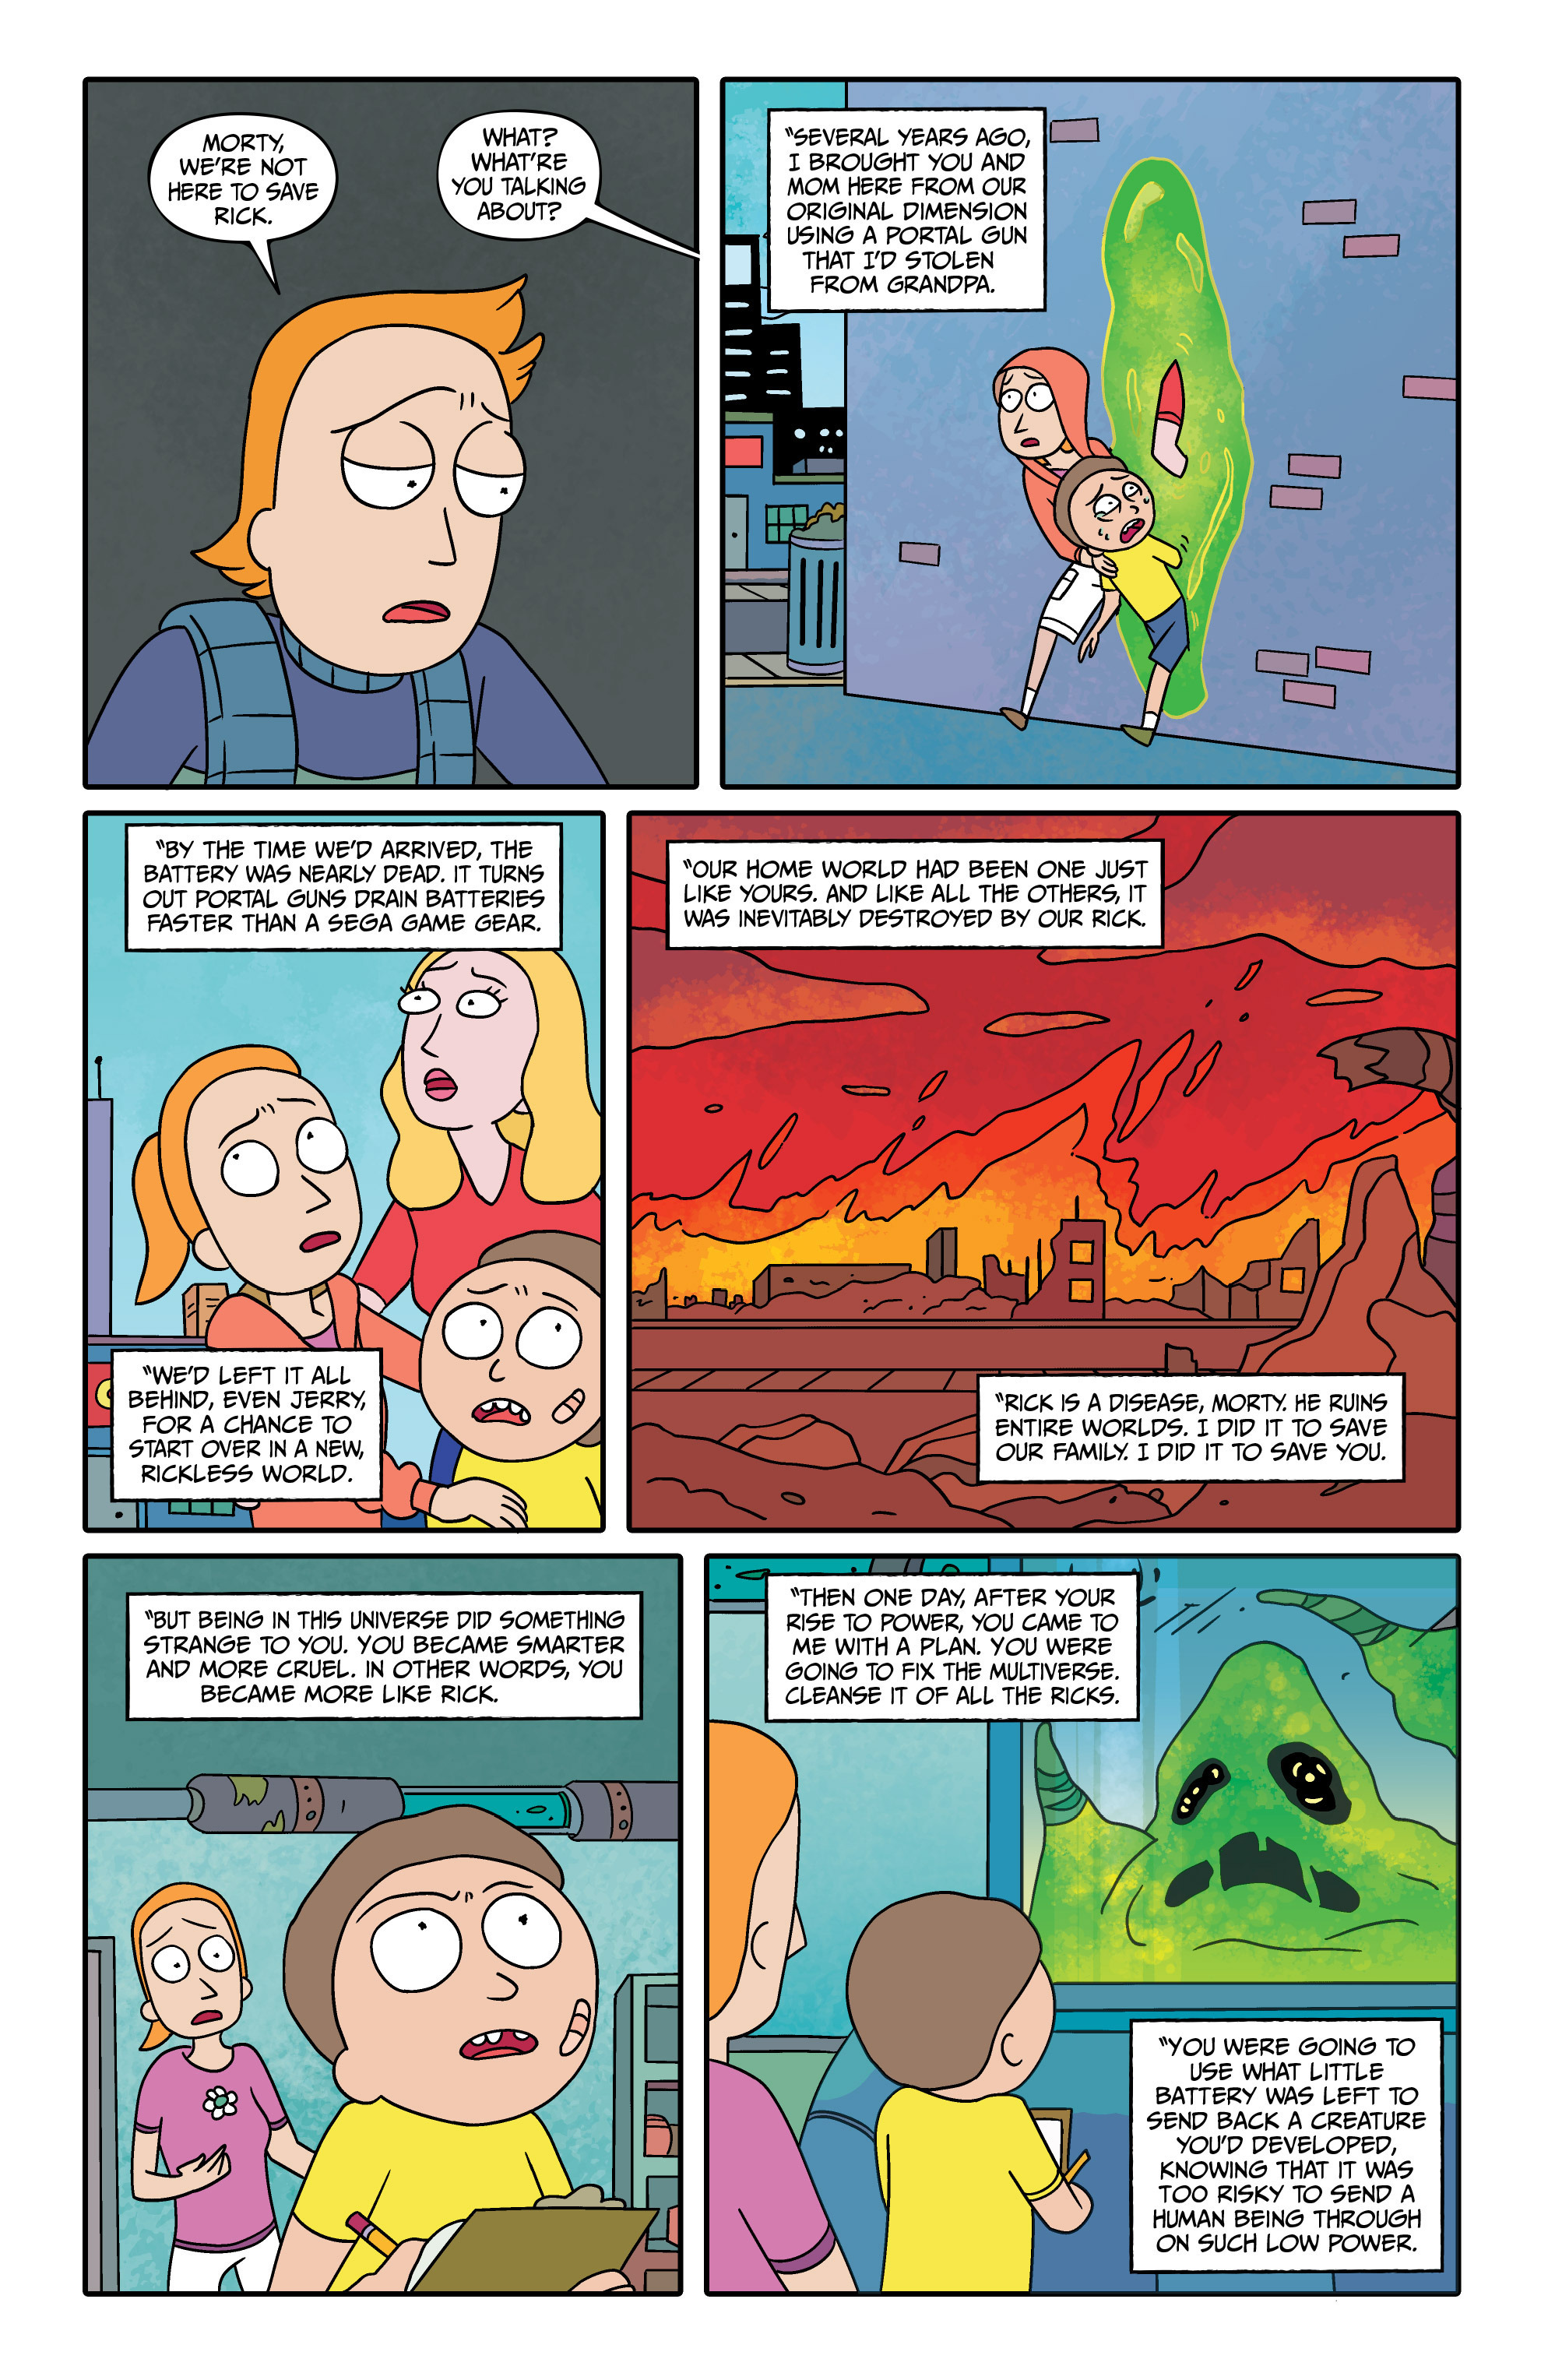 rick-and-morty-2015-chapter-10-page-1